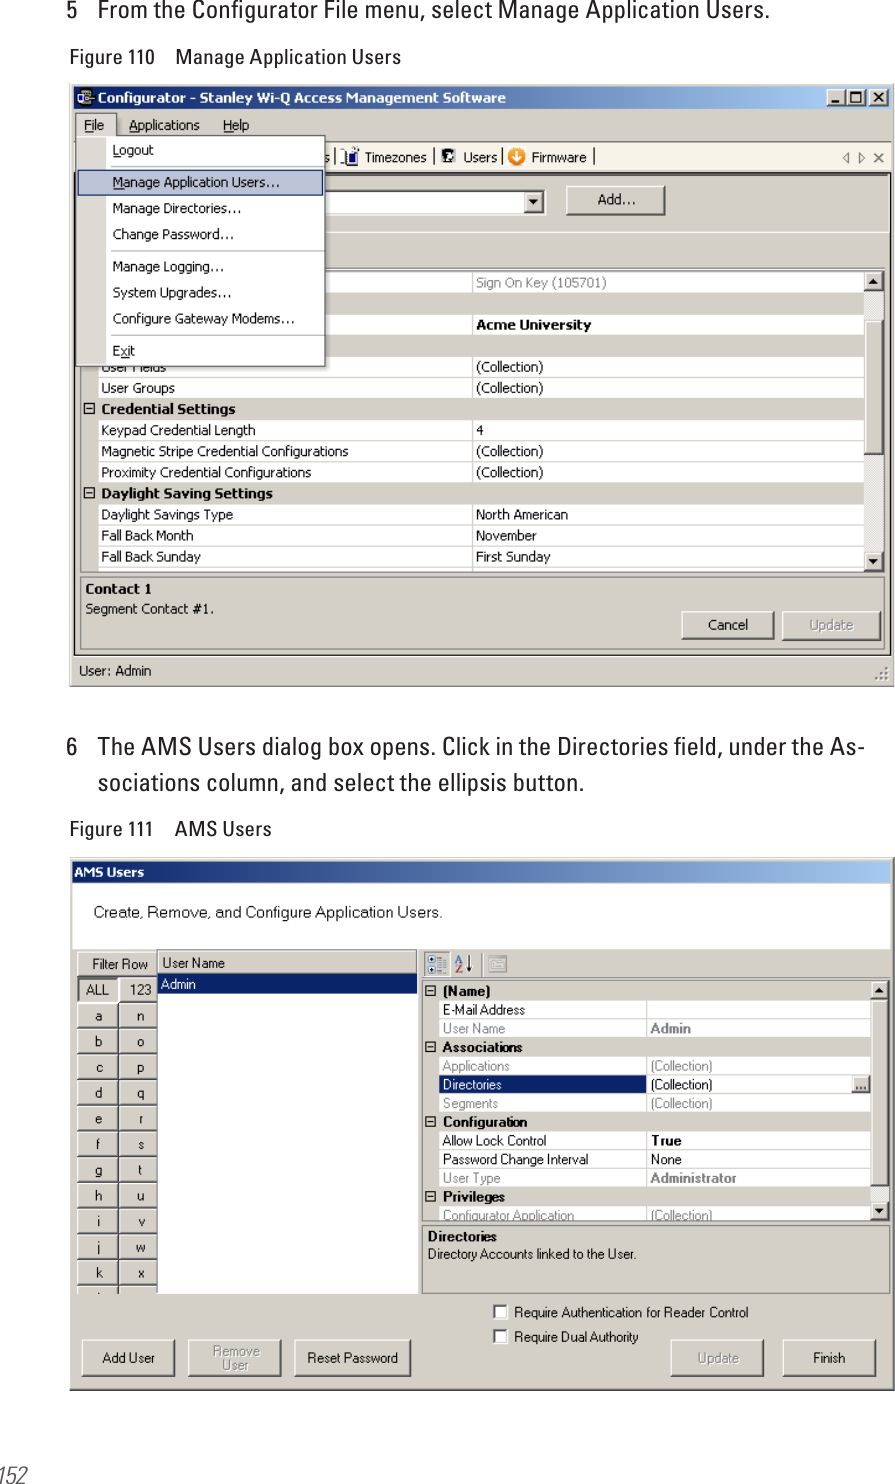 1525  From the Conﬁgurator File menu, select Manage Application Users.Figure 110  Manage Application Users6  The AMS Users dialog box opens. Click in the Directories ﬁeld, under the As-sociations column, and select the ellipsis button.Figure 111  AMS Users